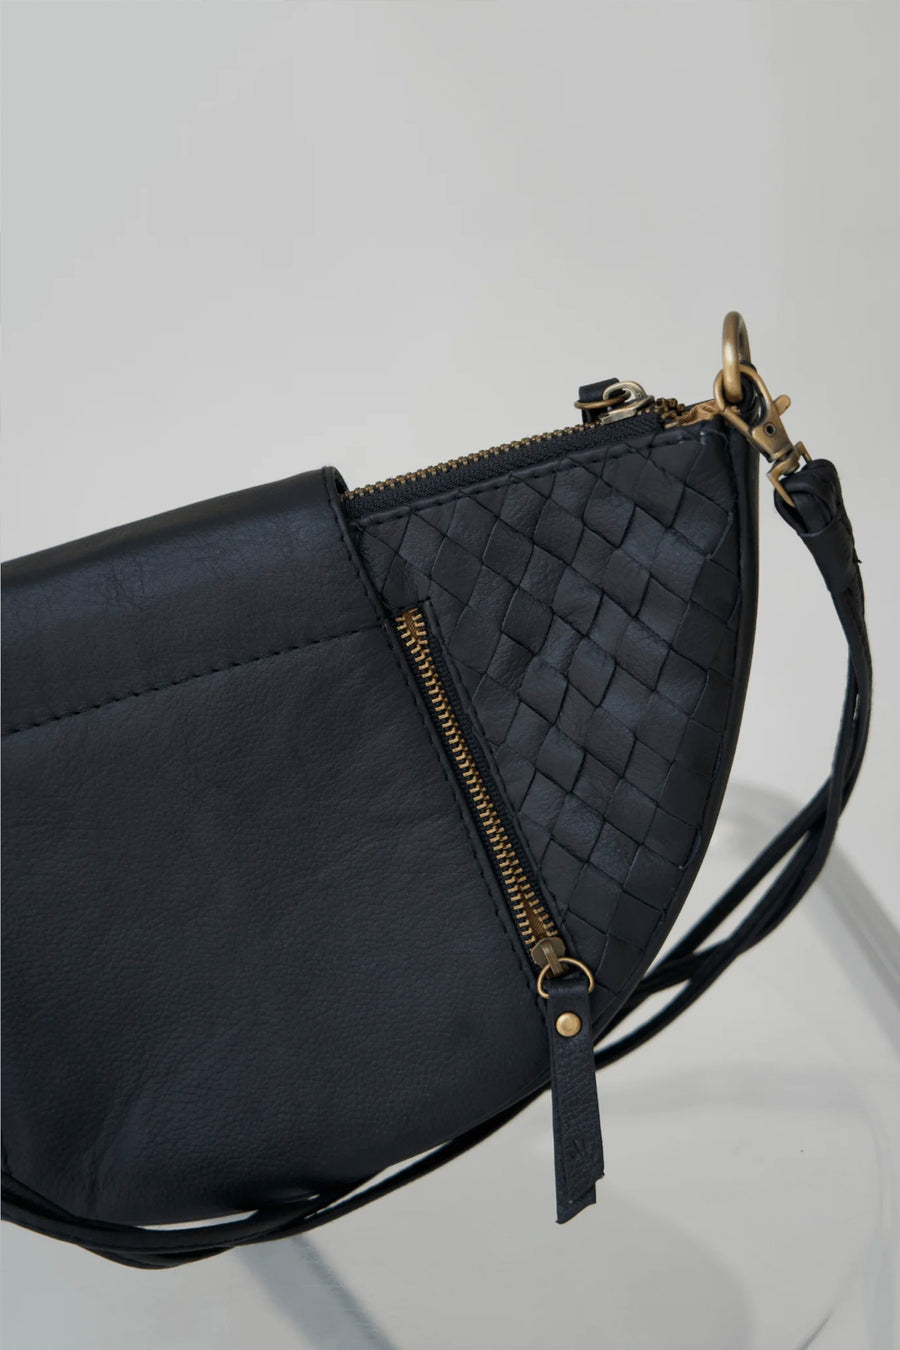 MANDRN Naomi Woven Leather Bag in Black